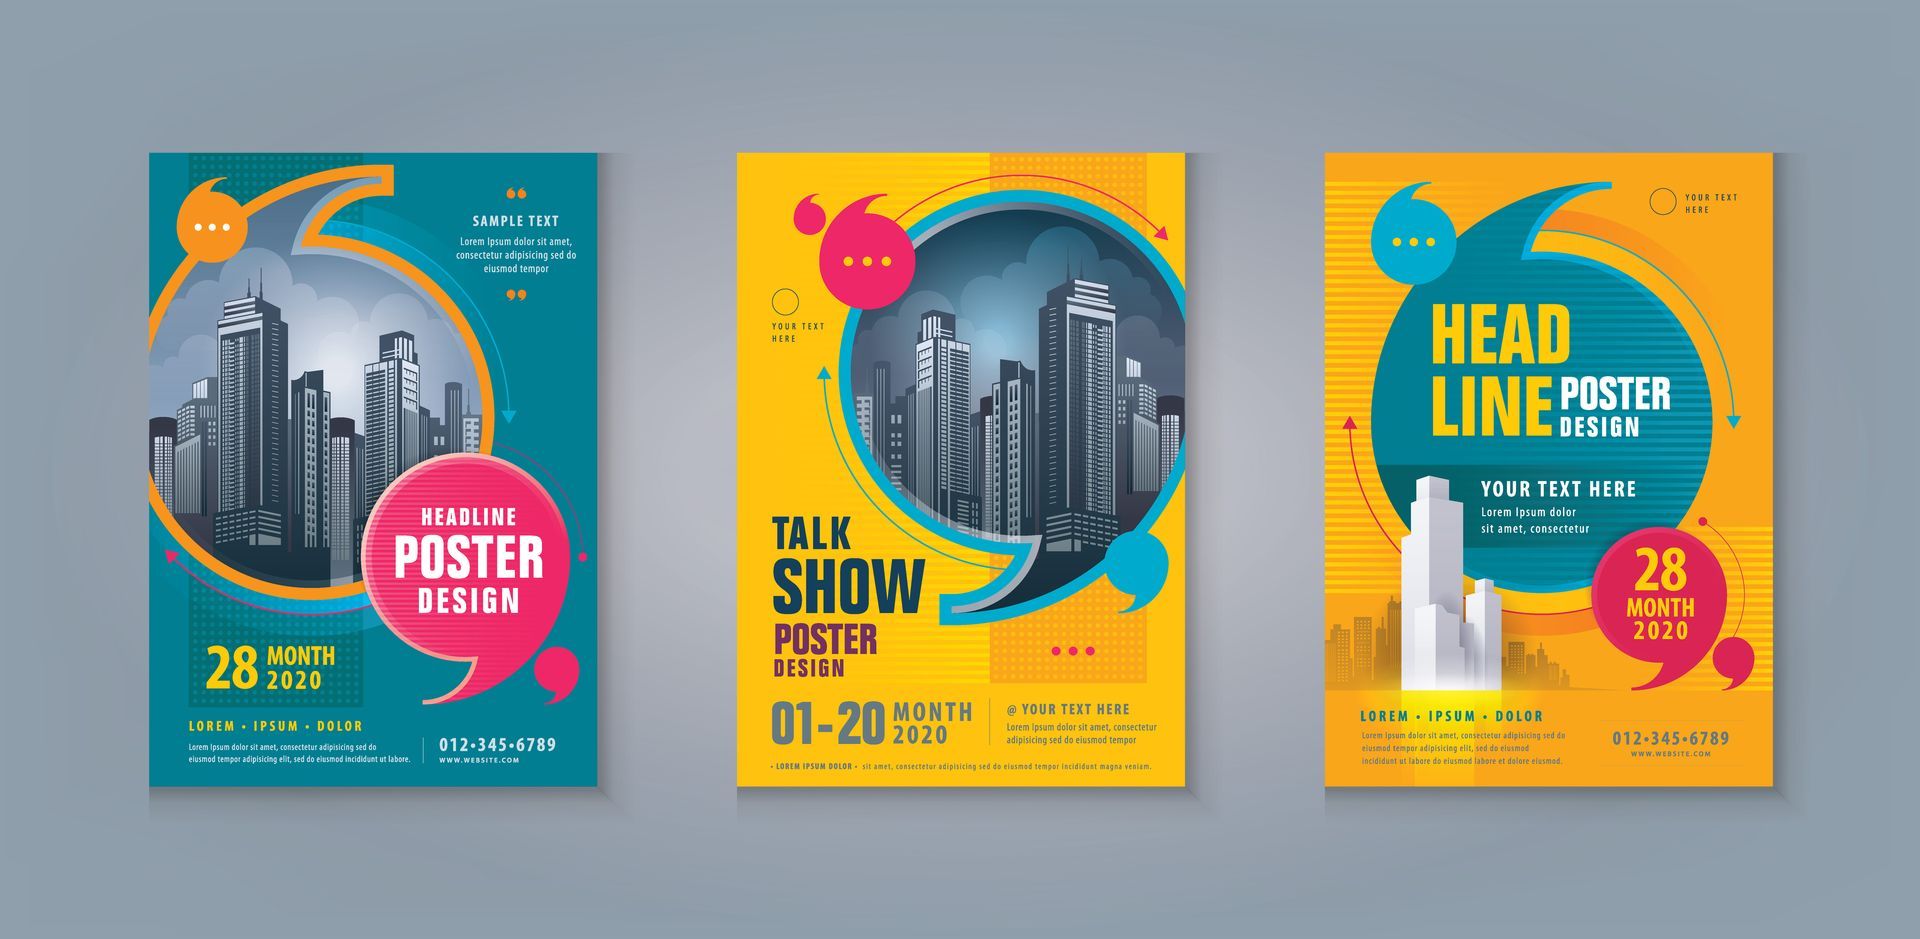 Montebello Custom Posters For Conferences & Trade Shows